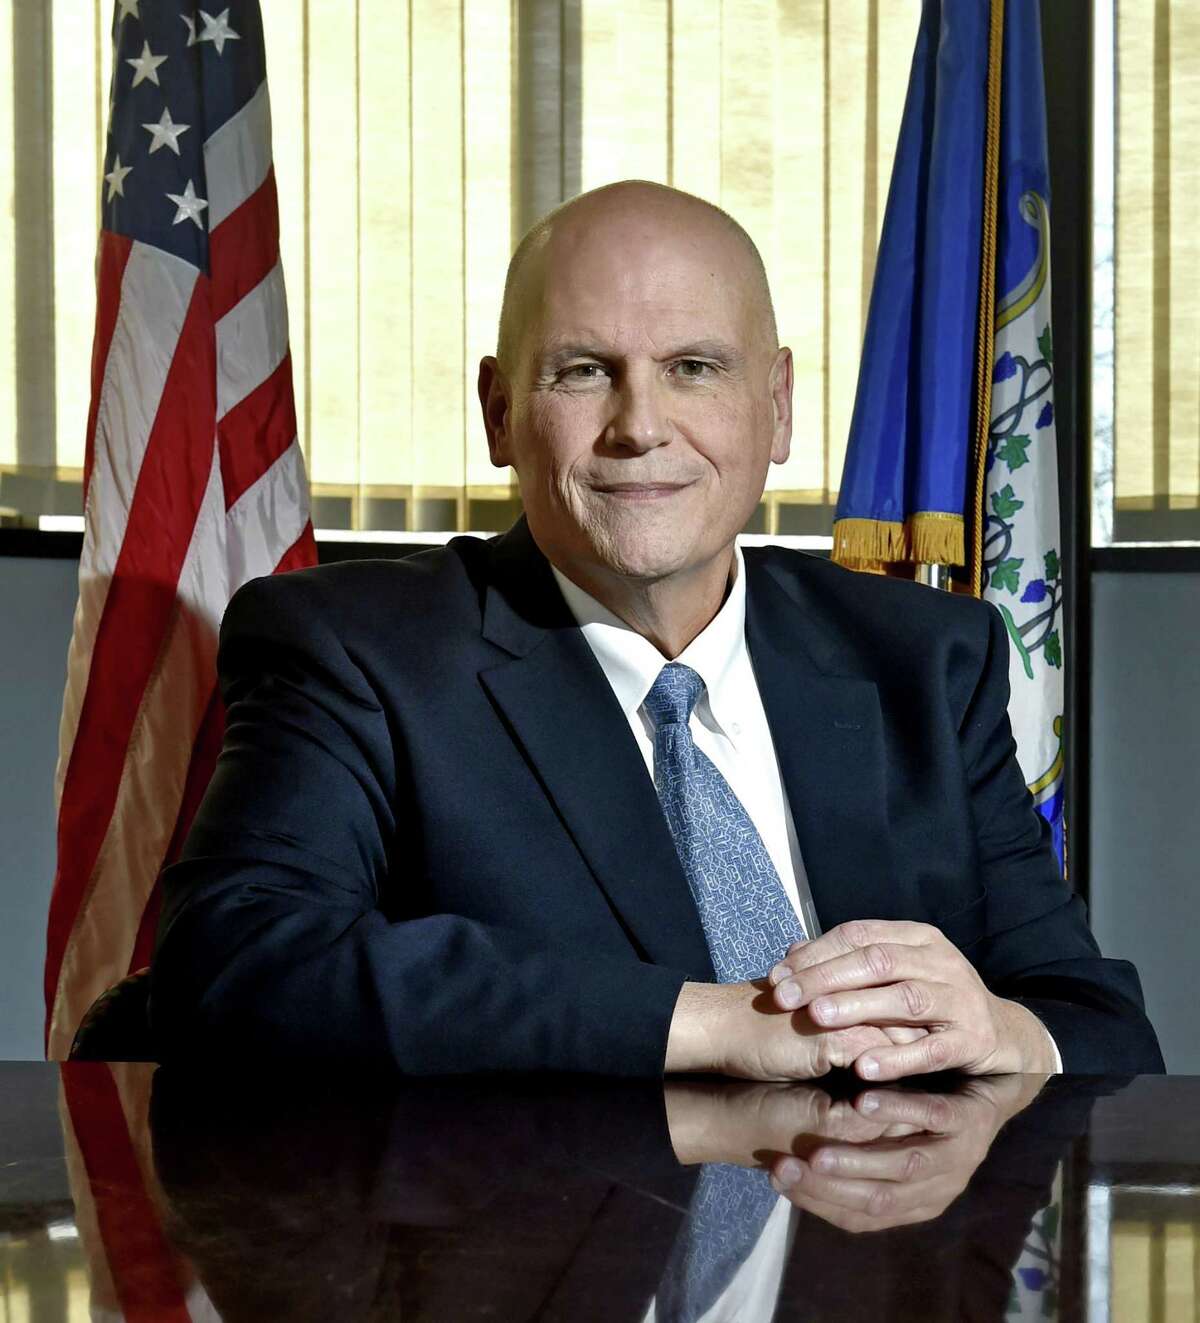 James C. Rovella, commissioner of the Connecticut Department of Emergency Services and Public Protection